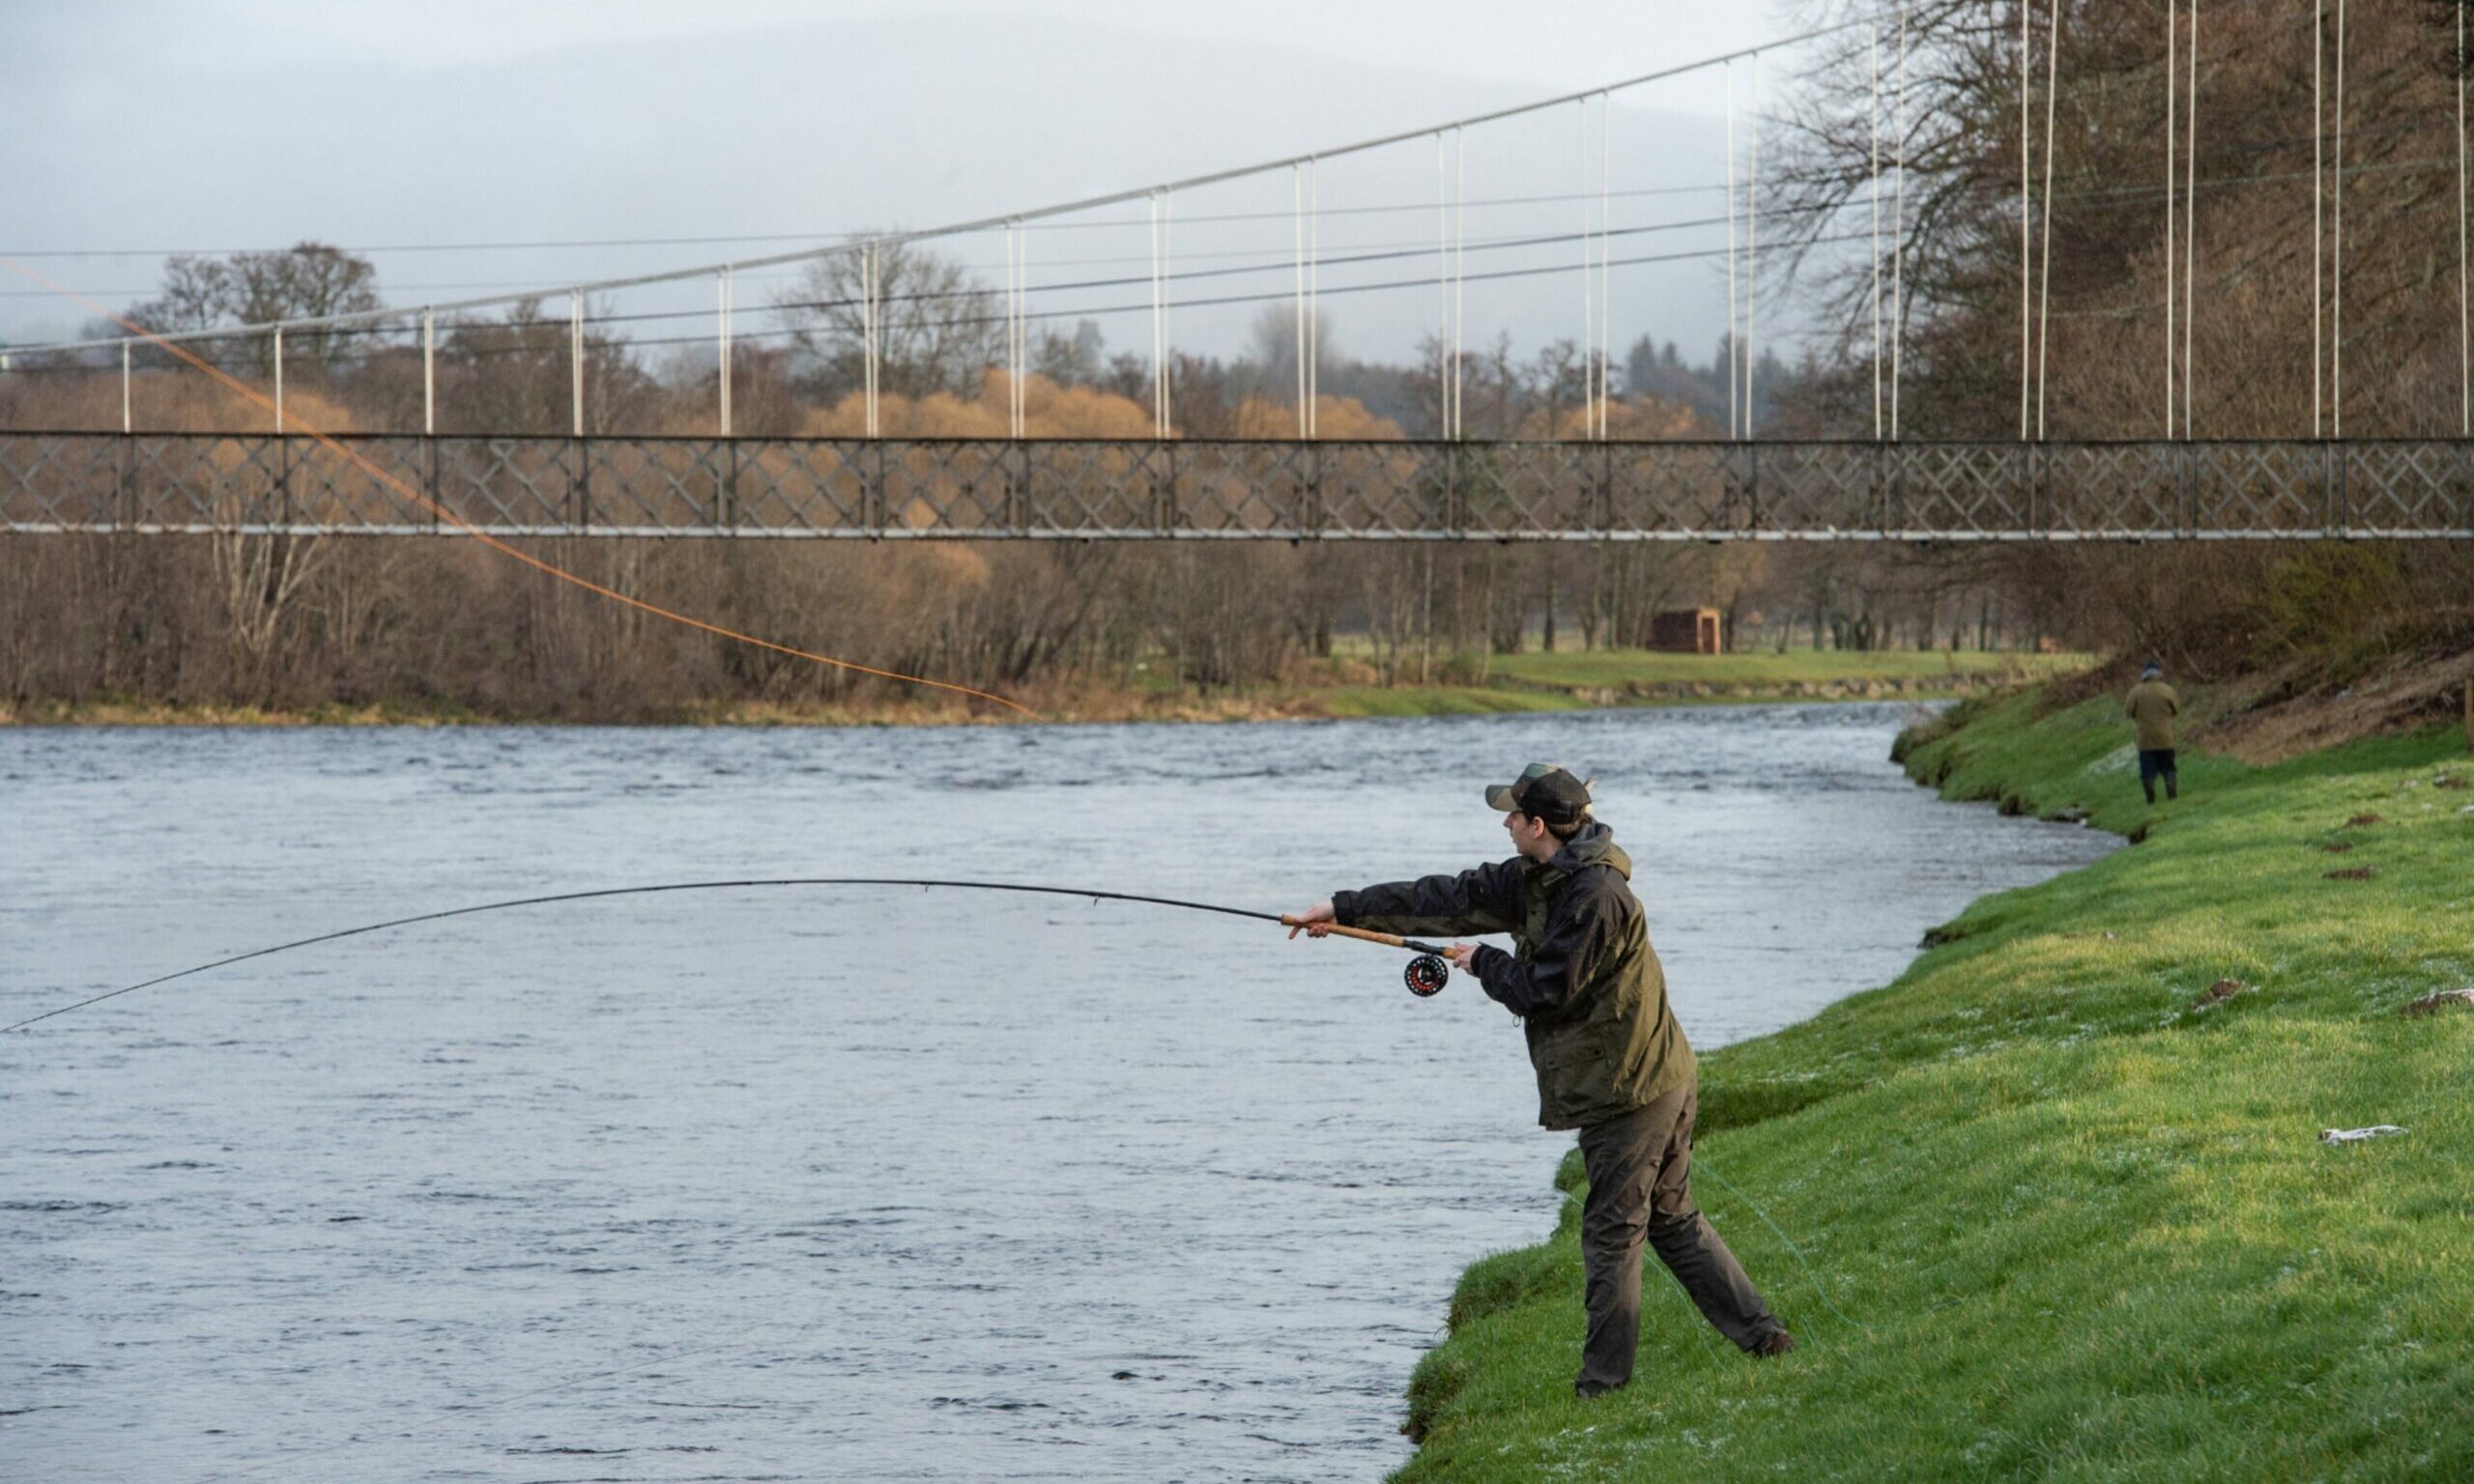 Lone angler casting line into River Spey on banks in Aberlour.